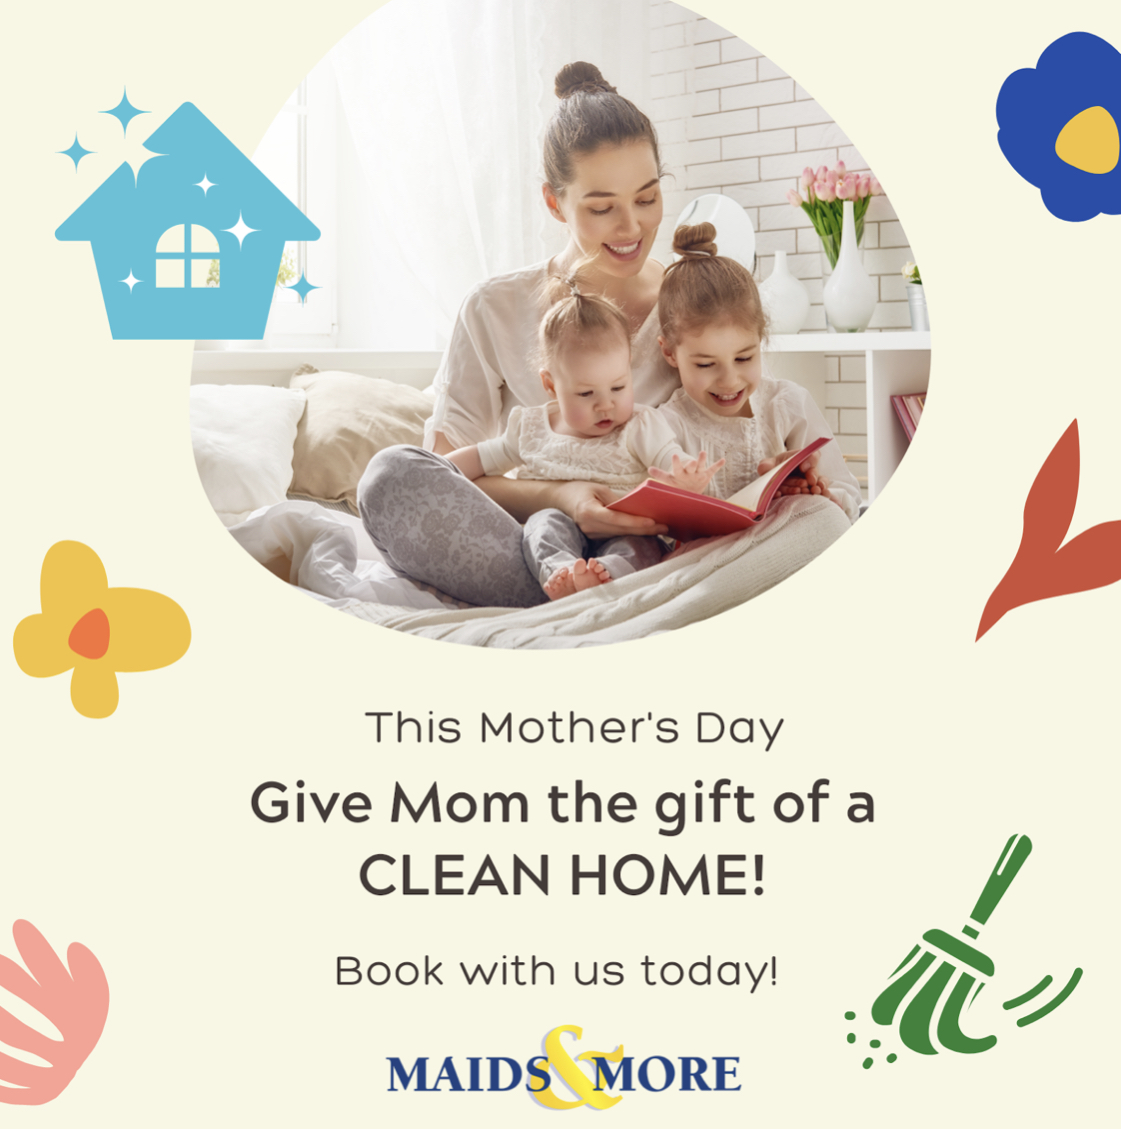 Maid's & More Mother's Day 2021